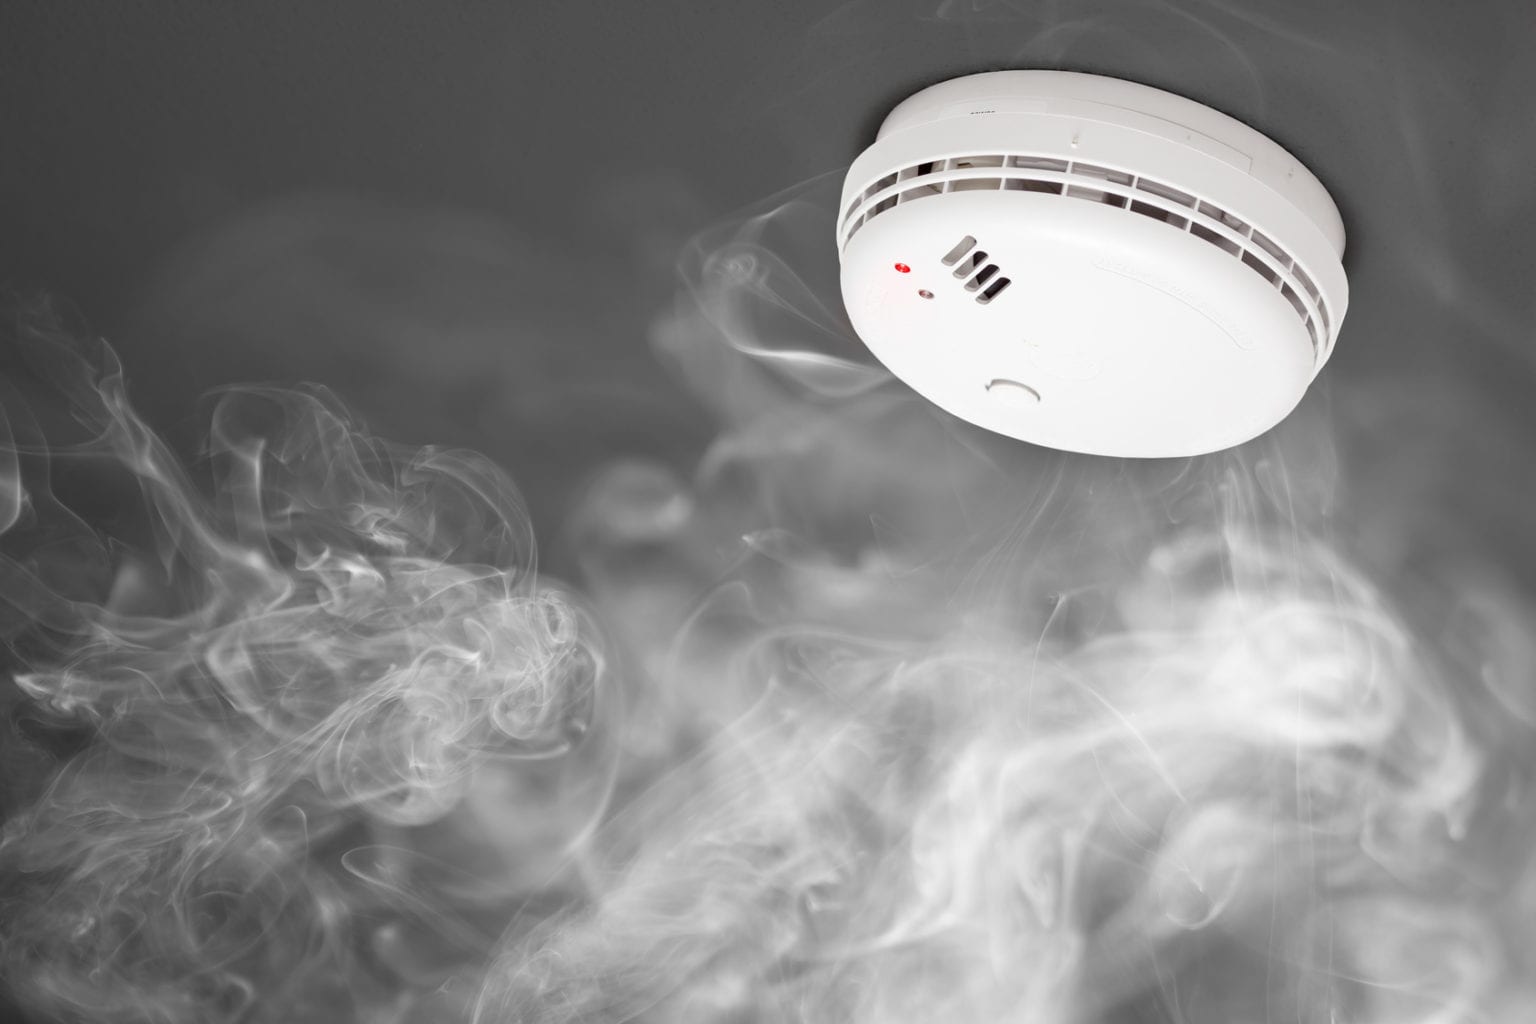 Mister Sparky OKC provides professional smoke detector installation services.